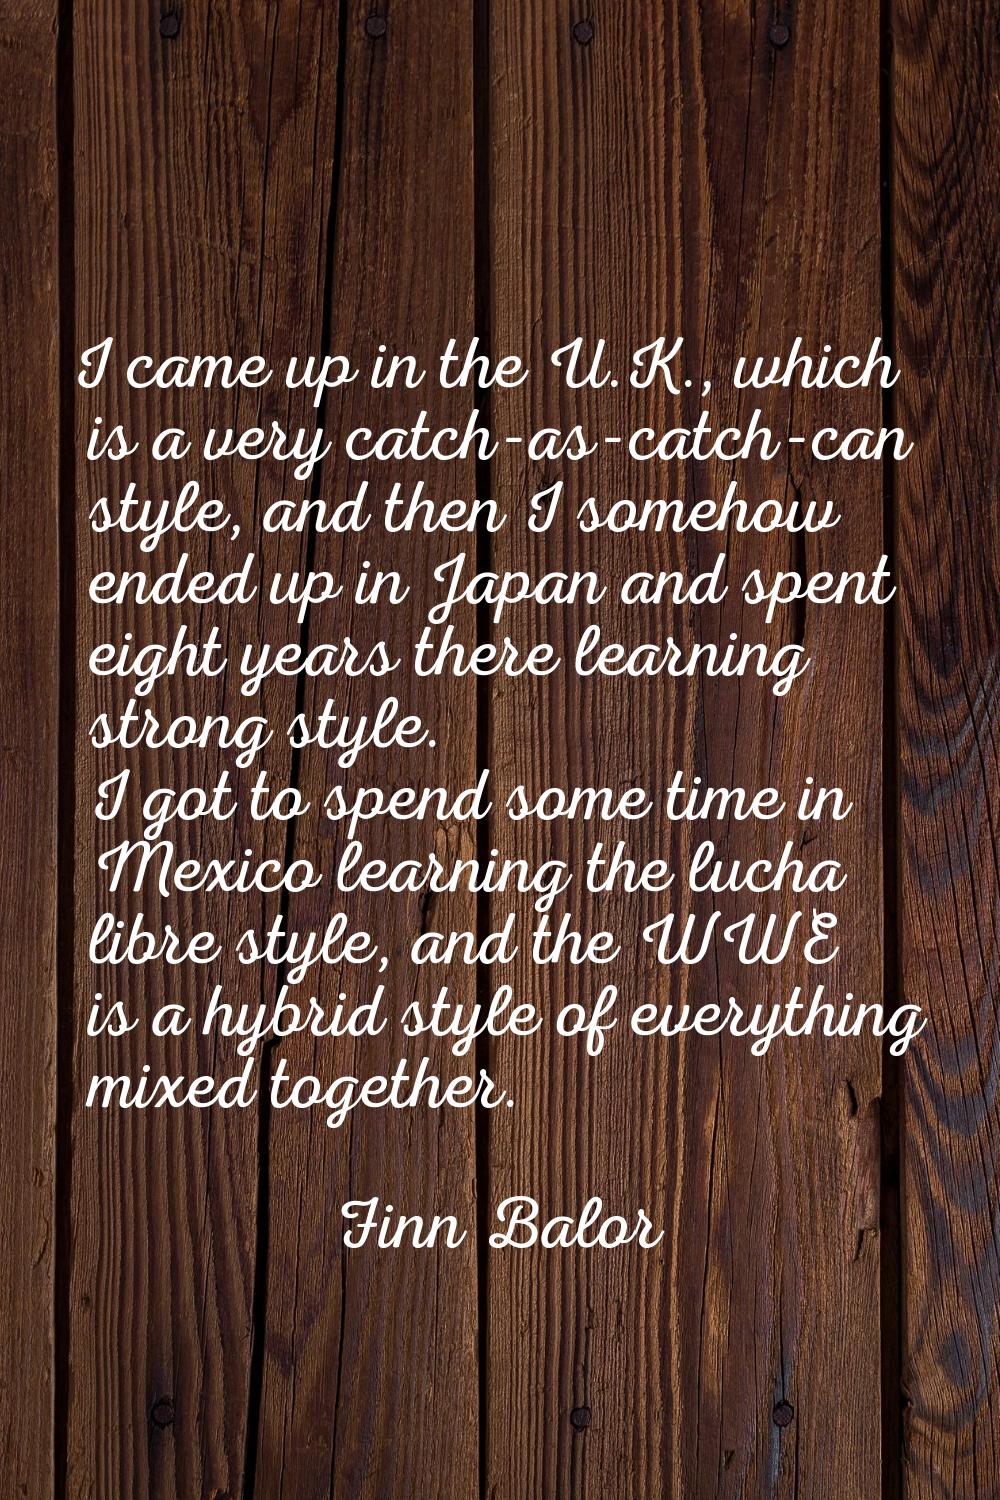 I came up in the U.K., which is a very catch-as-catch-can style, and then I somehow ended up in Jap